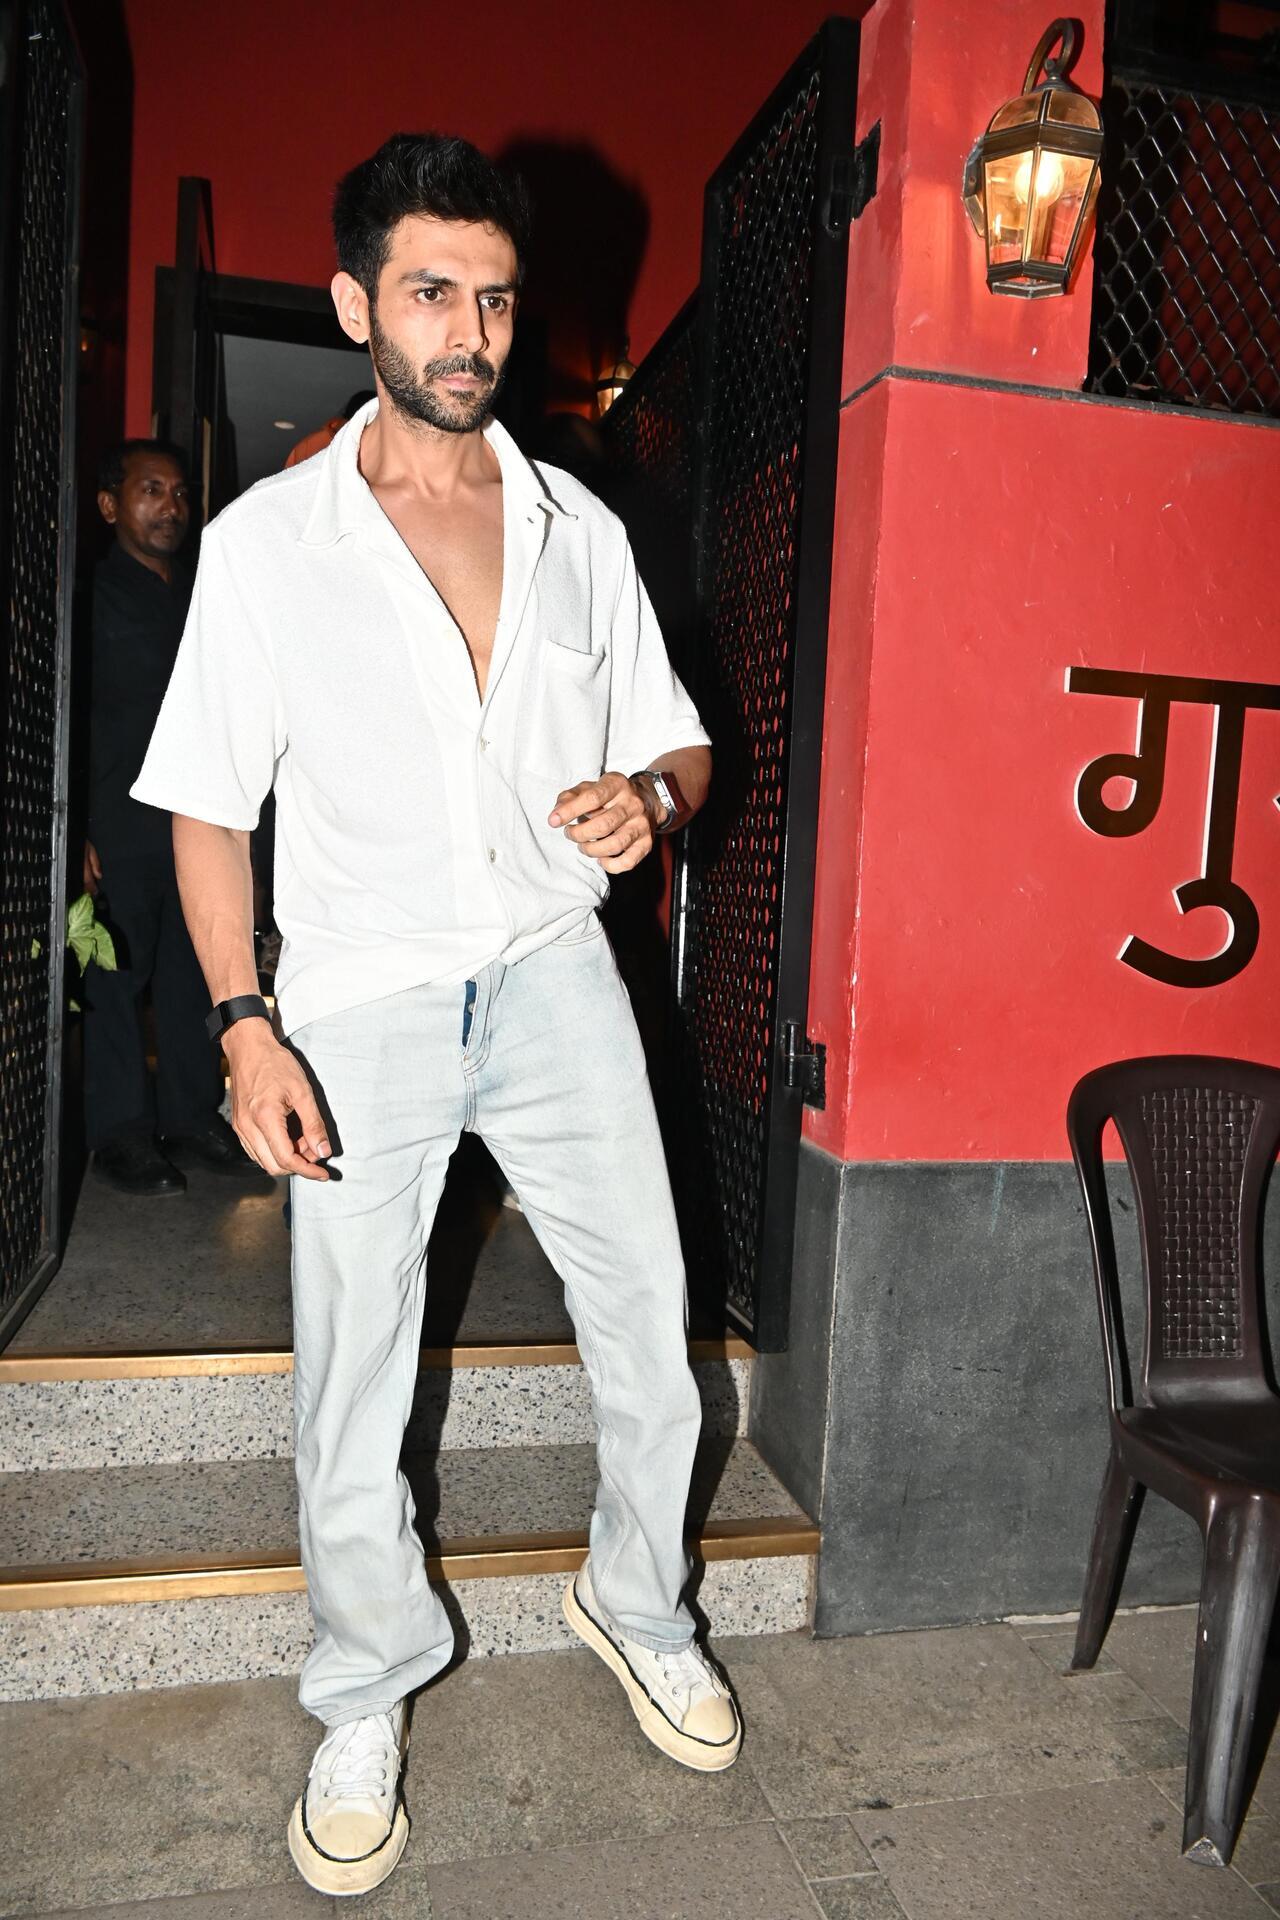 Kartik Aaryan was also spotted at a party spot in the city dressed in an all-white outfit